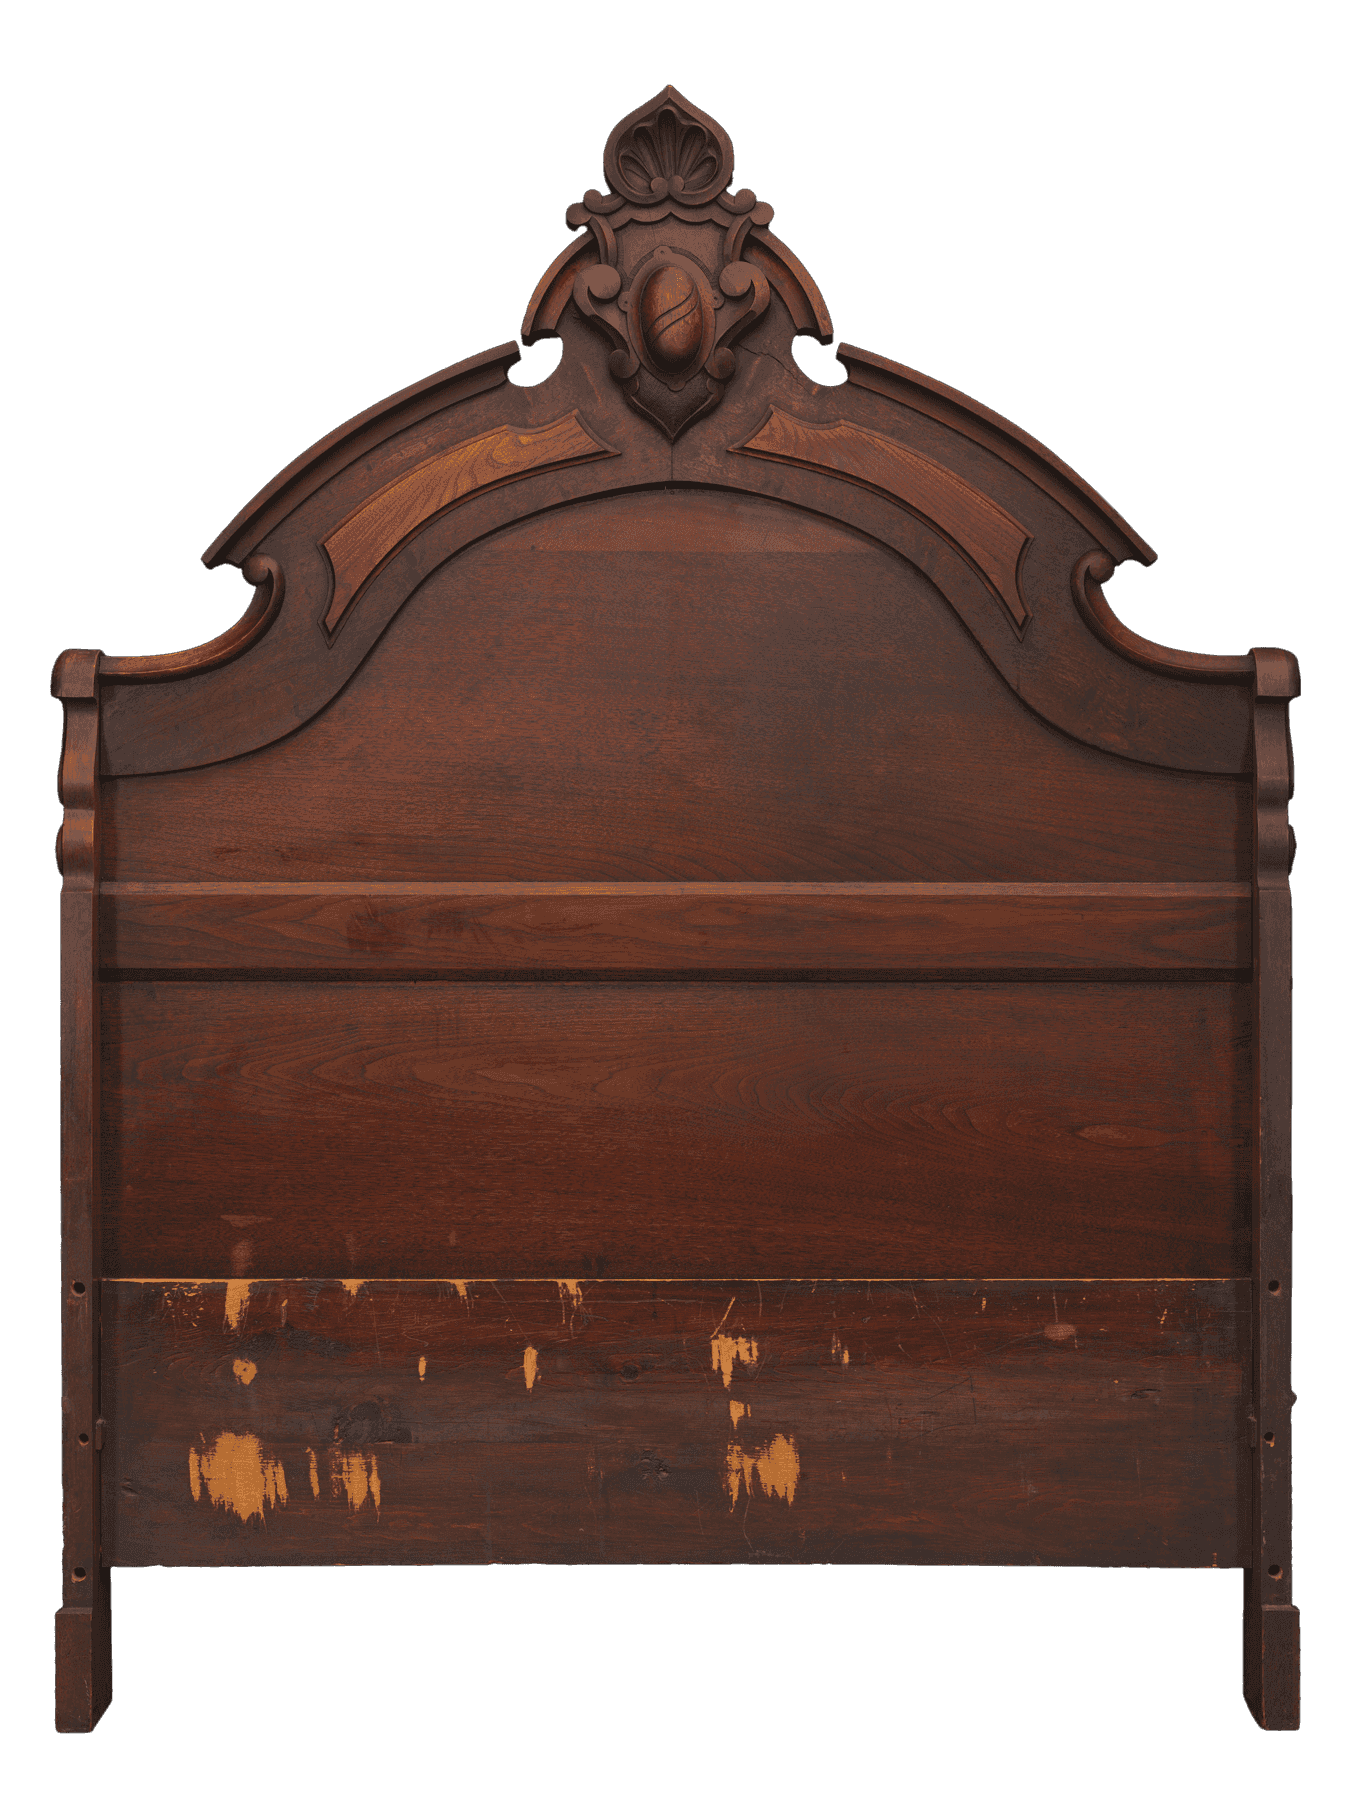 Arched, wooden headboard with carved center crown with palmette and oval medallion elements and ornamental carvings